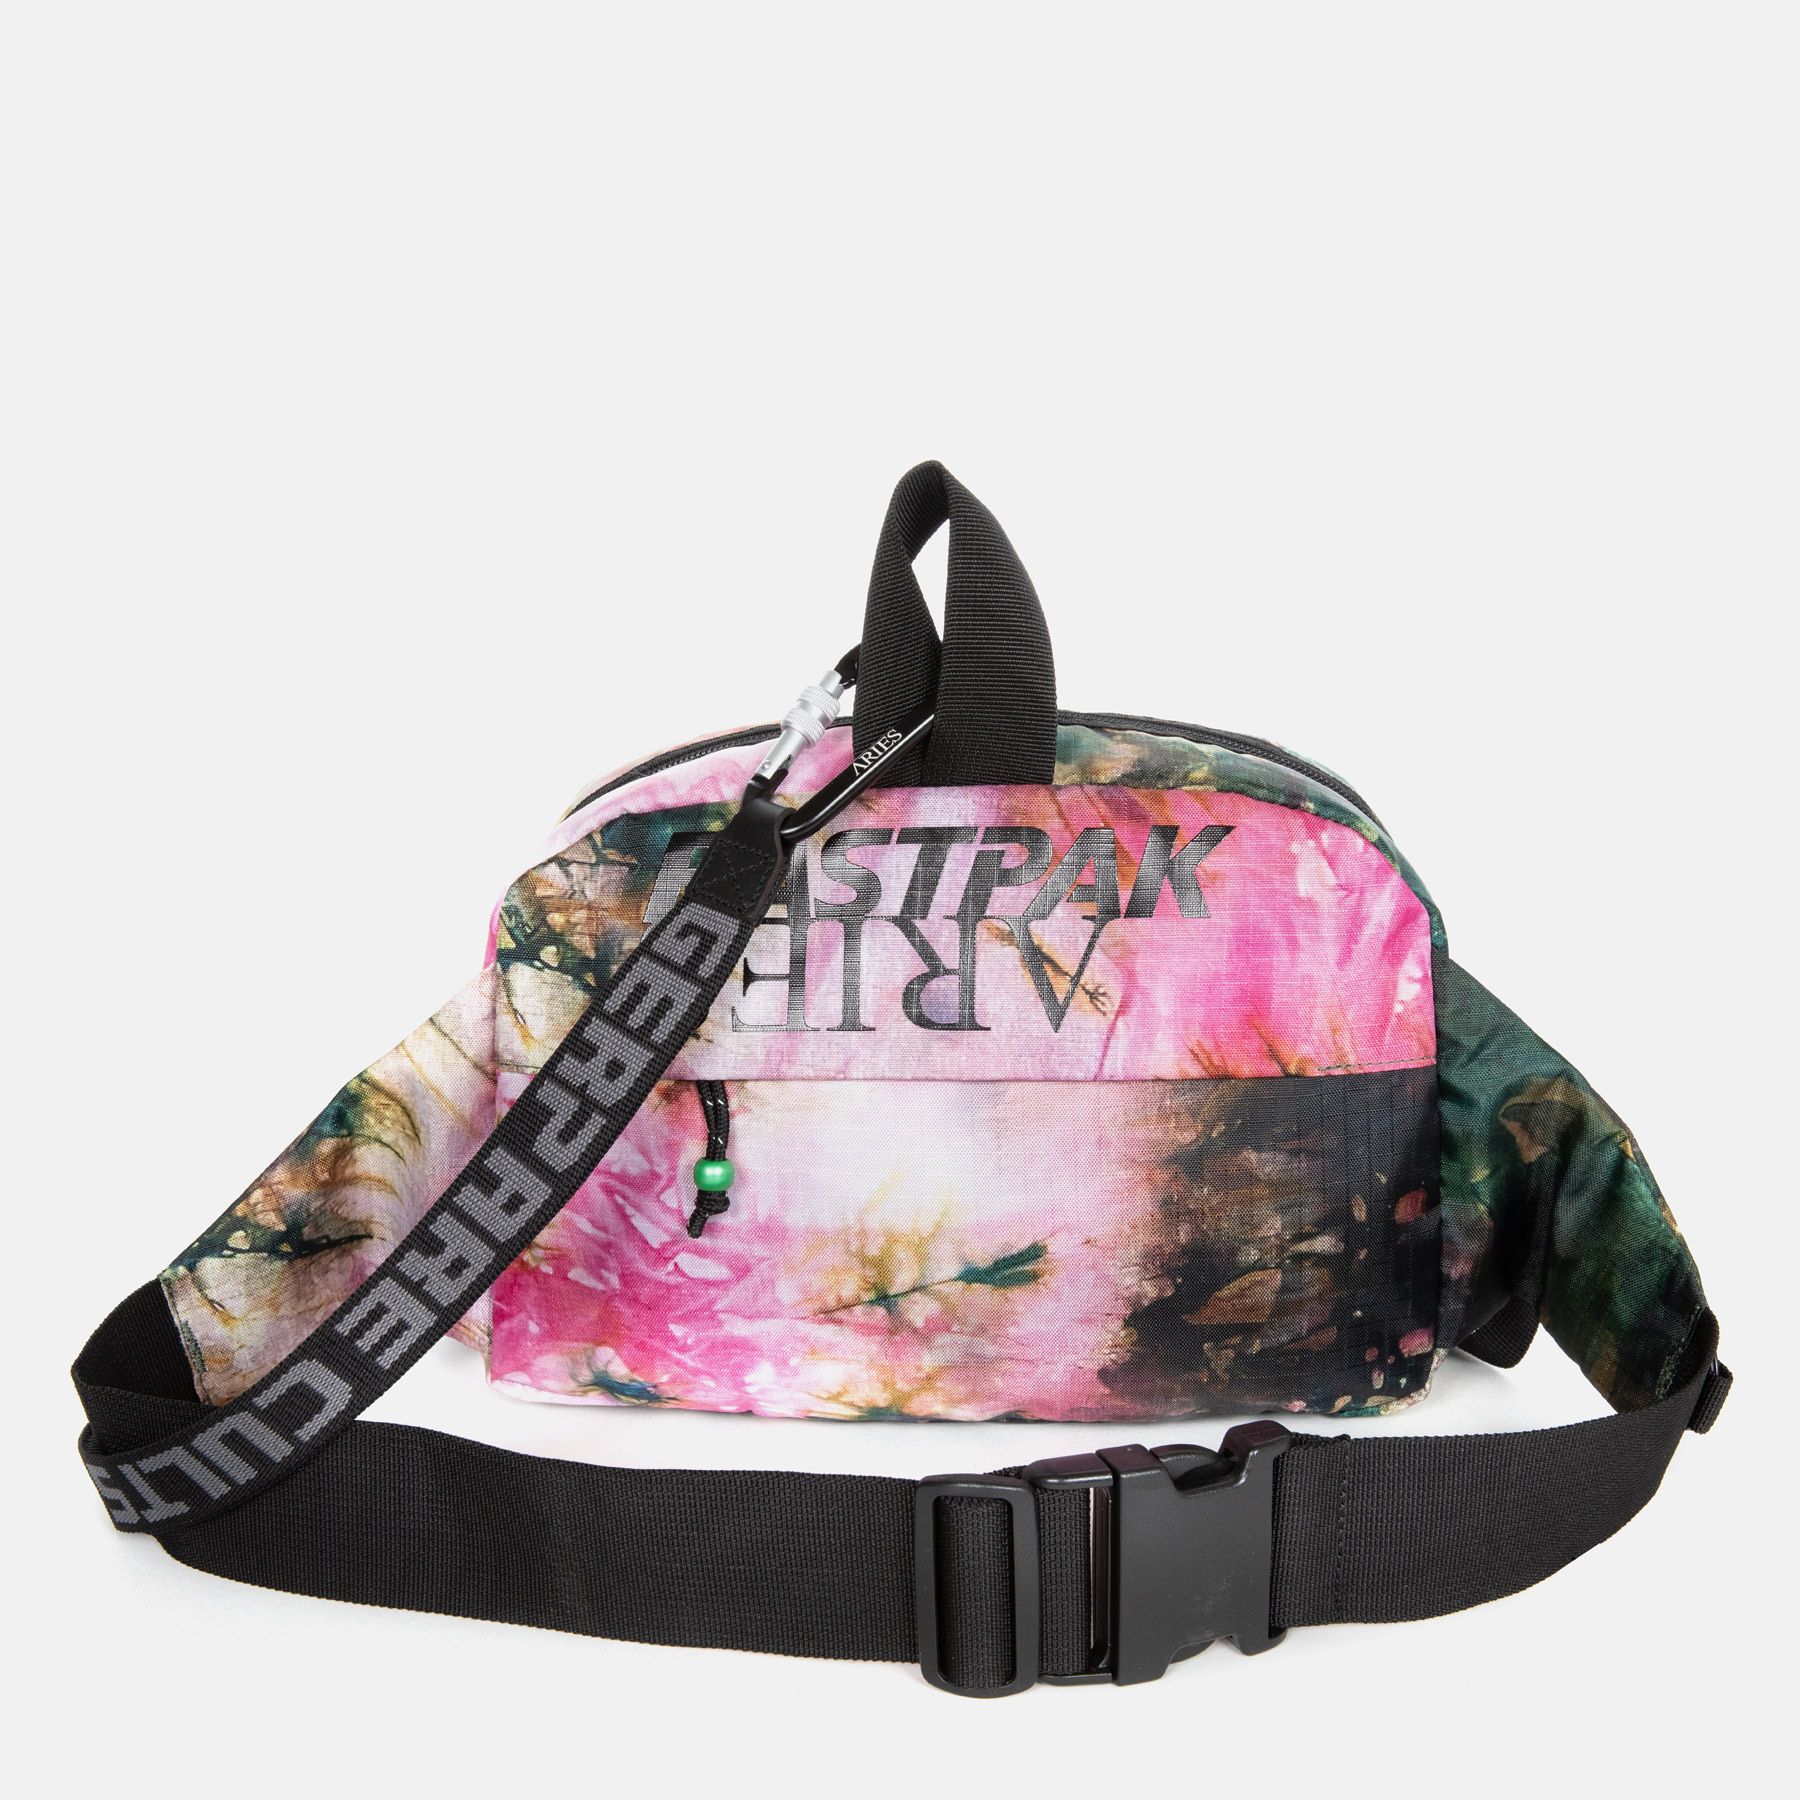 Picture of Aries | Aries Bum Bag